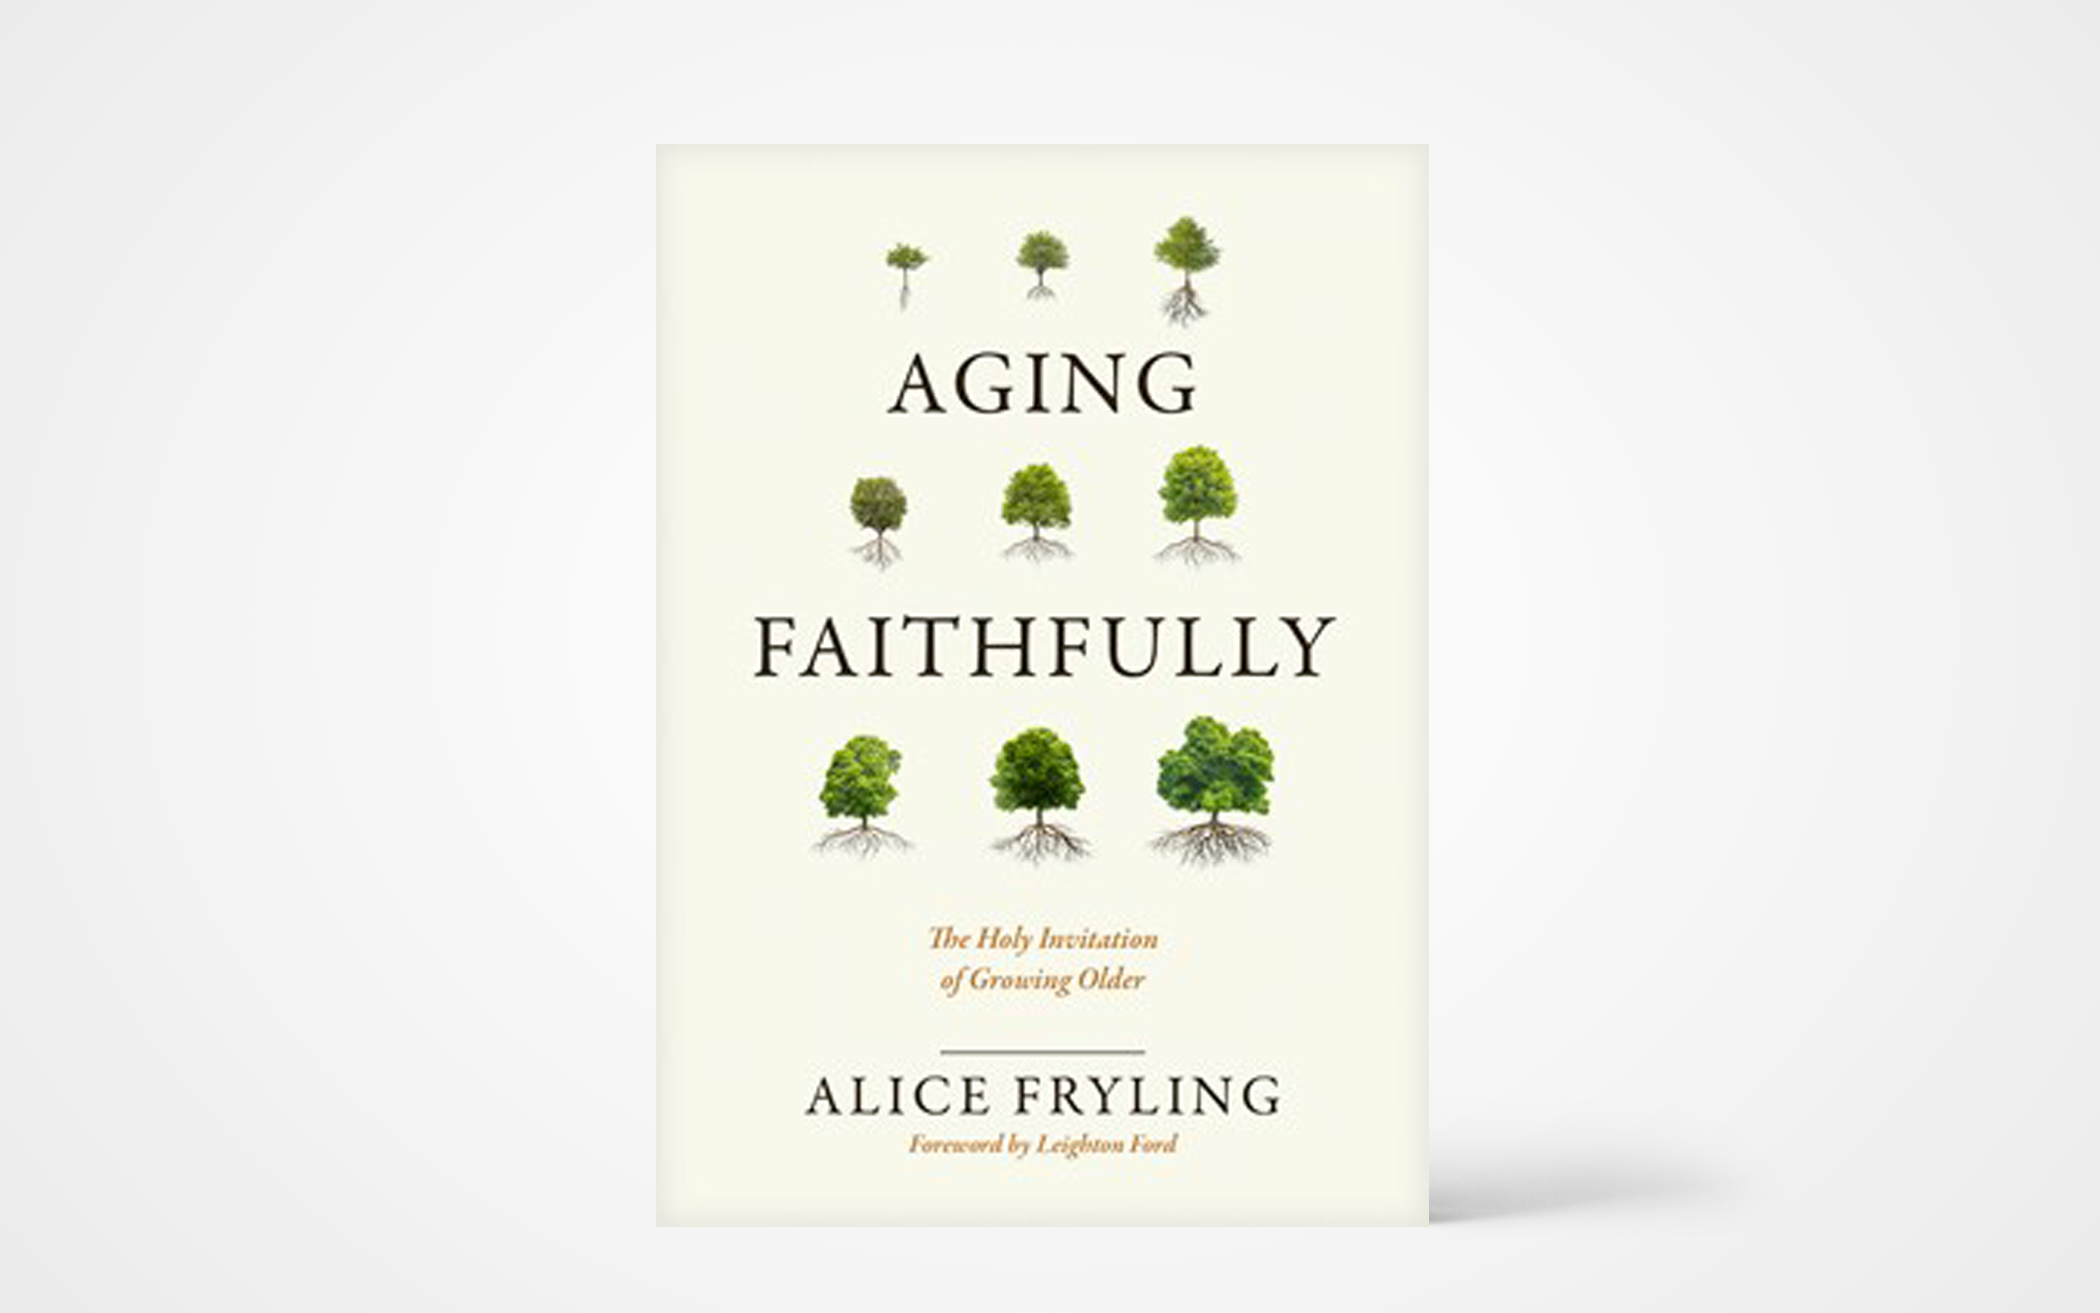 Aging Faithfully: The Holy Invitation of Growing Older